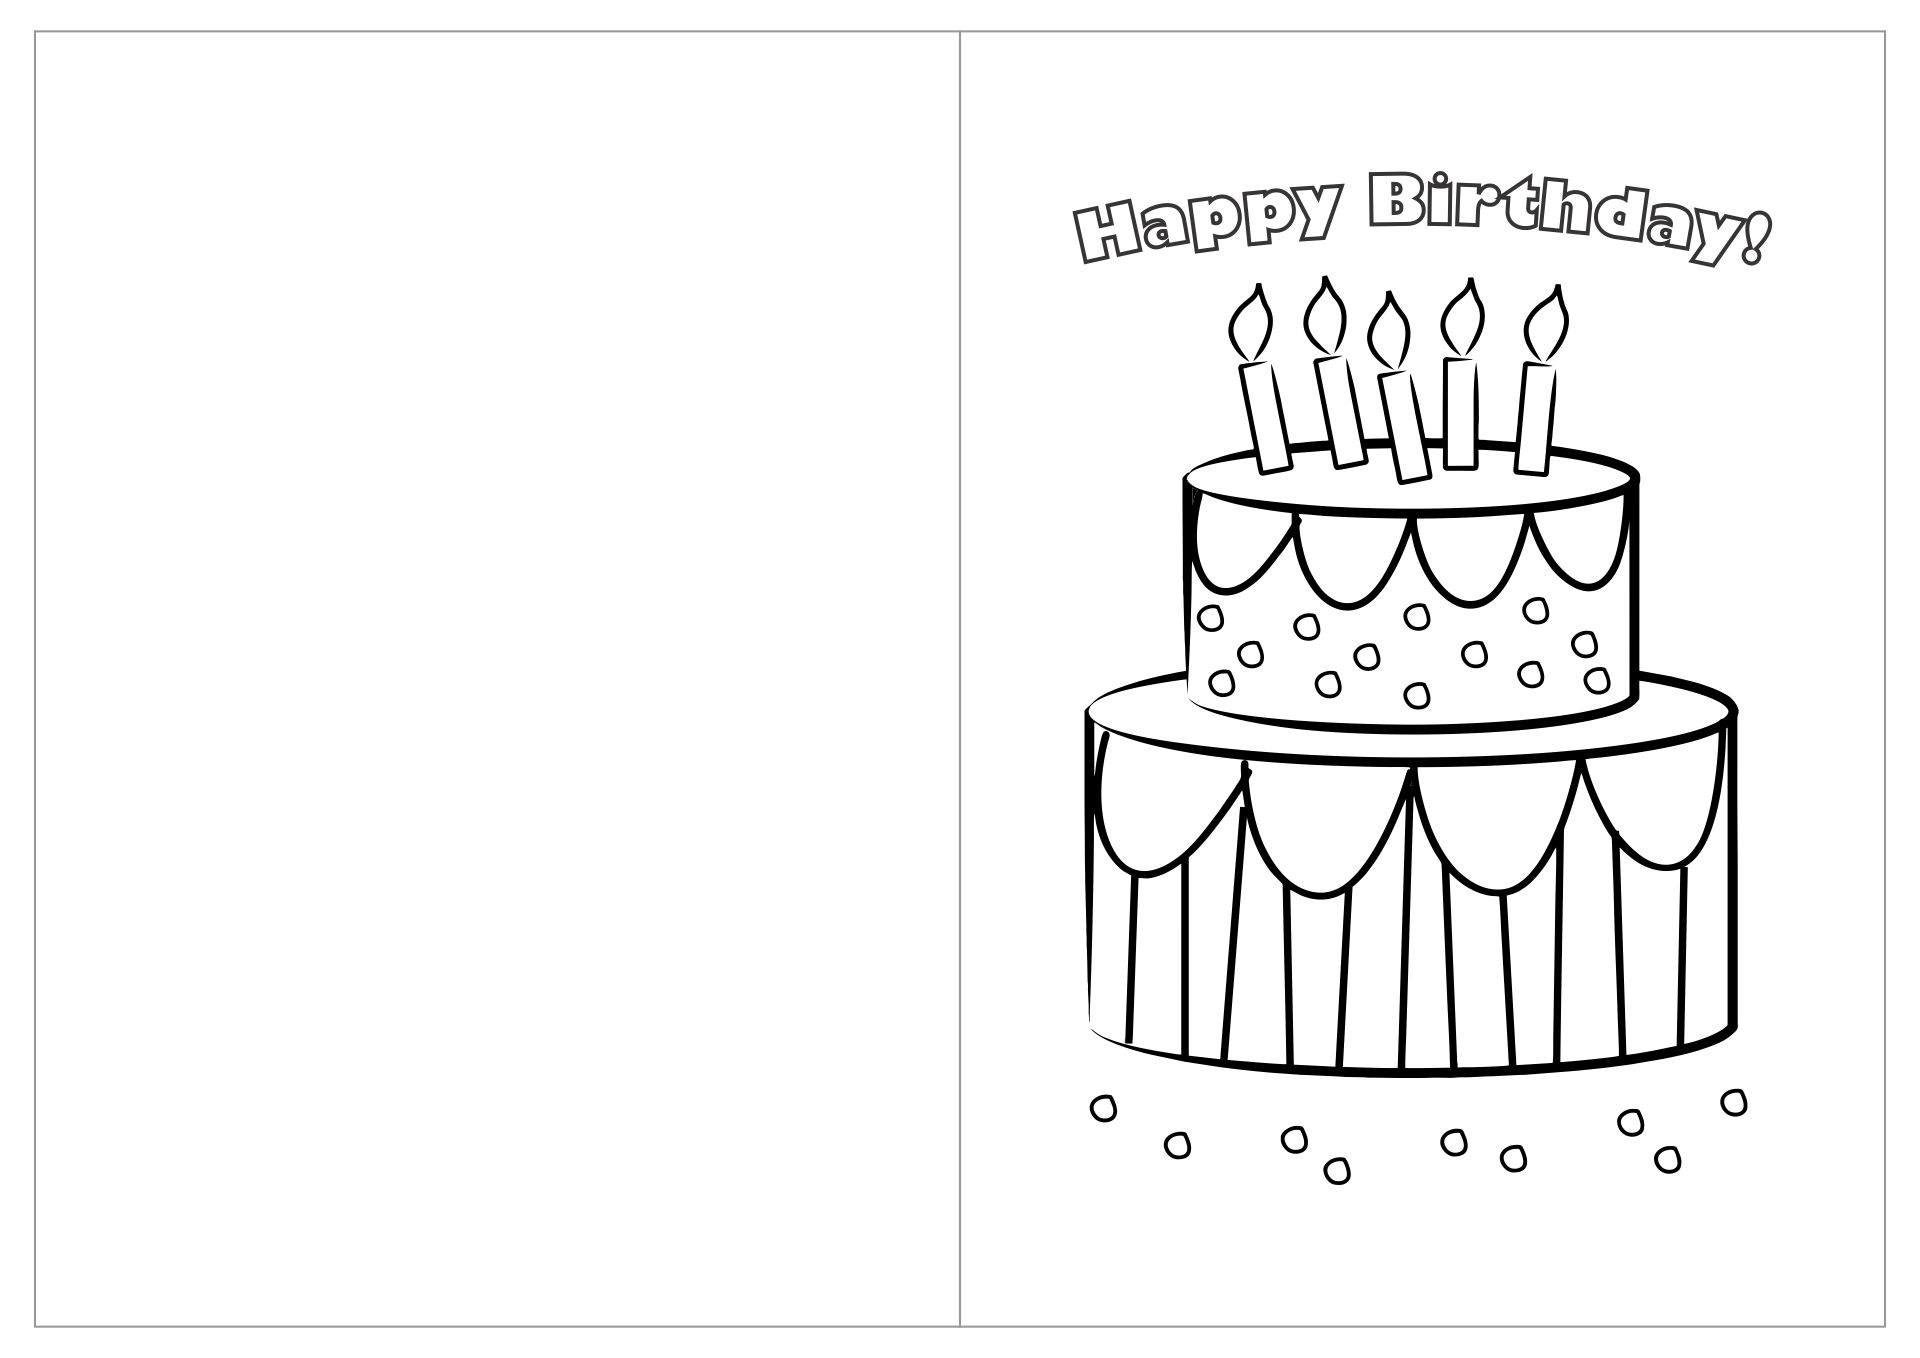 Foldable Birthday Card Coloring Page / Wonderland Crafts Free Printable